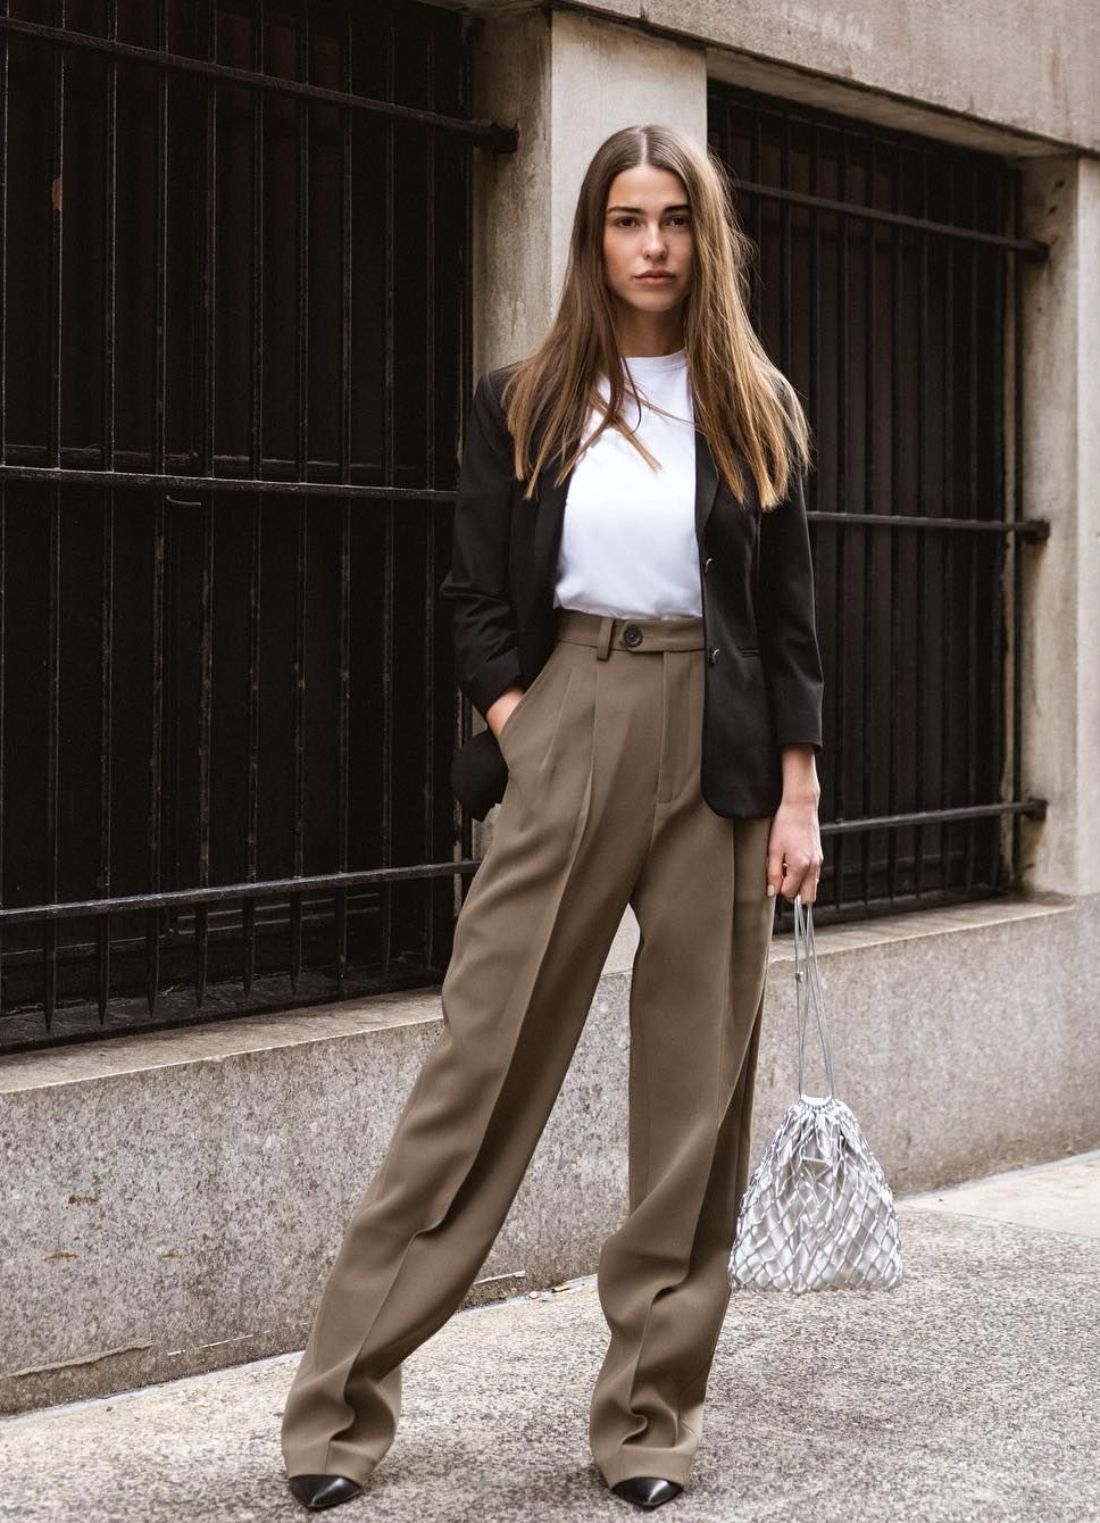 Fall Outfits Sophia Roe in Tailored Trousers, White T-Shirt, Black Jacket Outfit